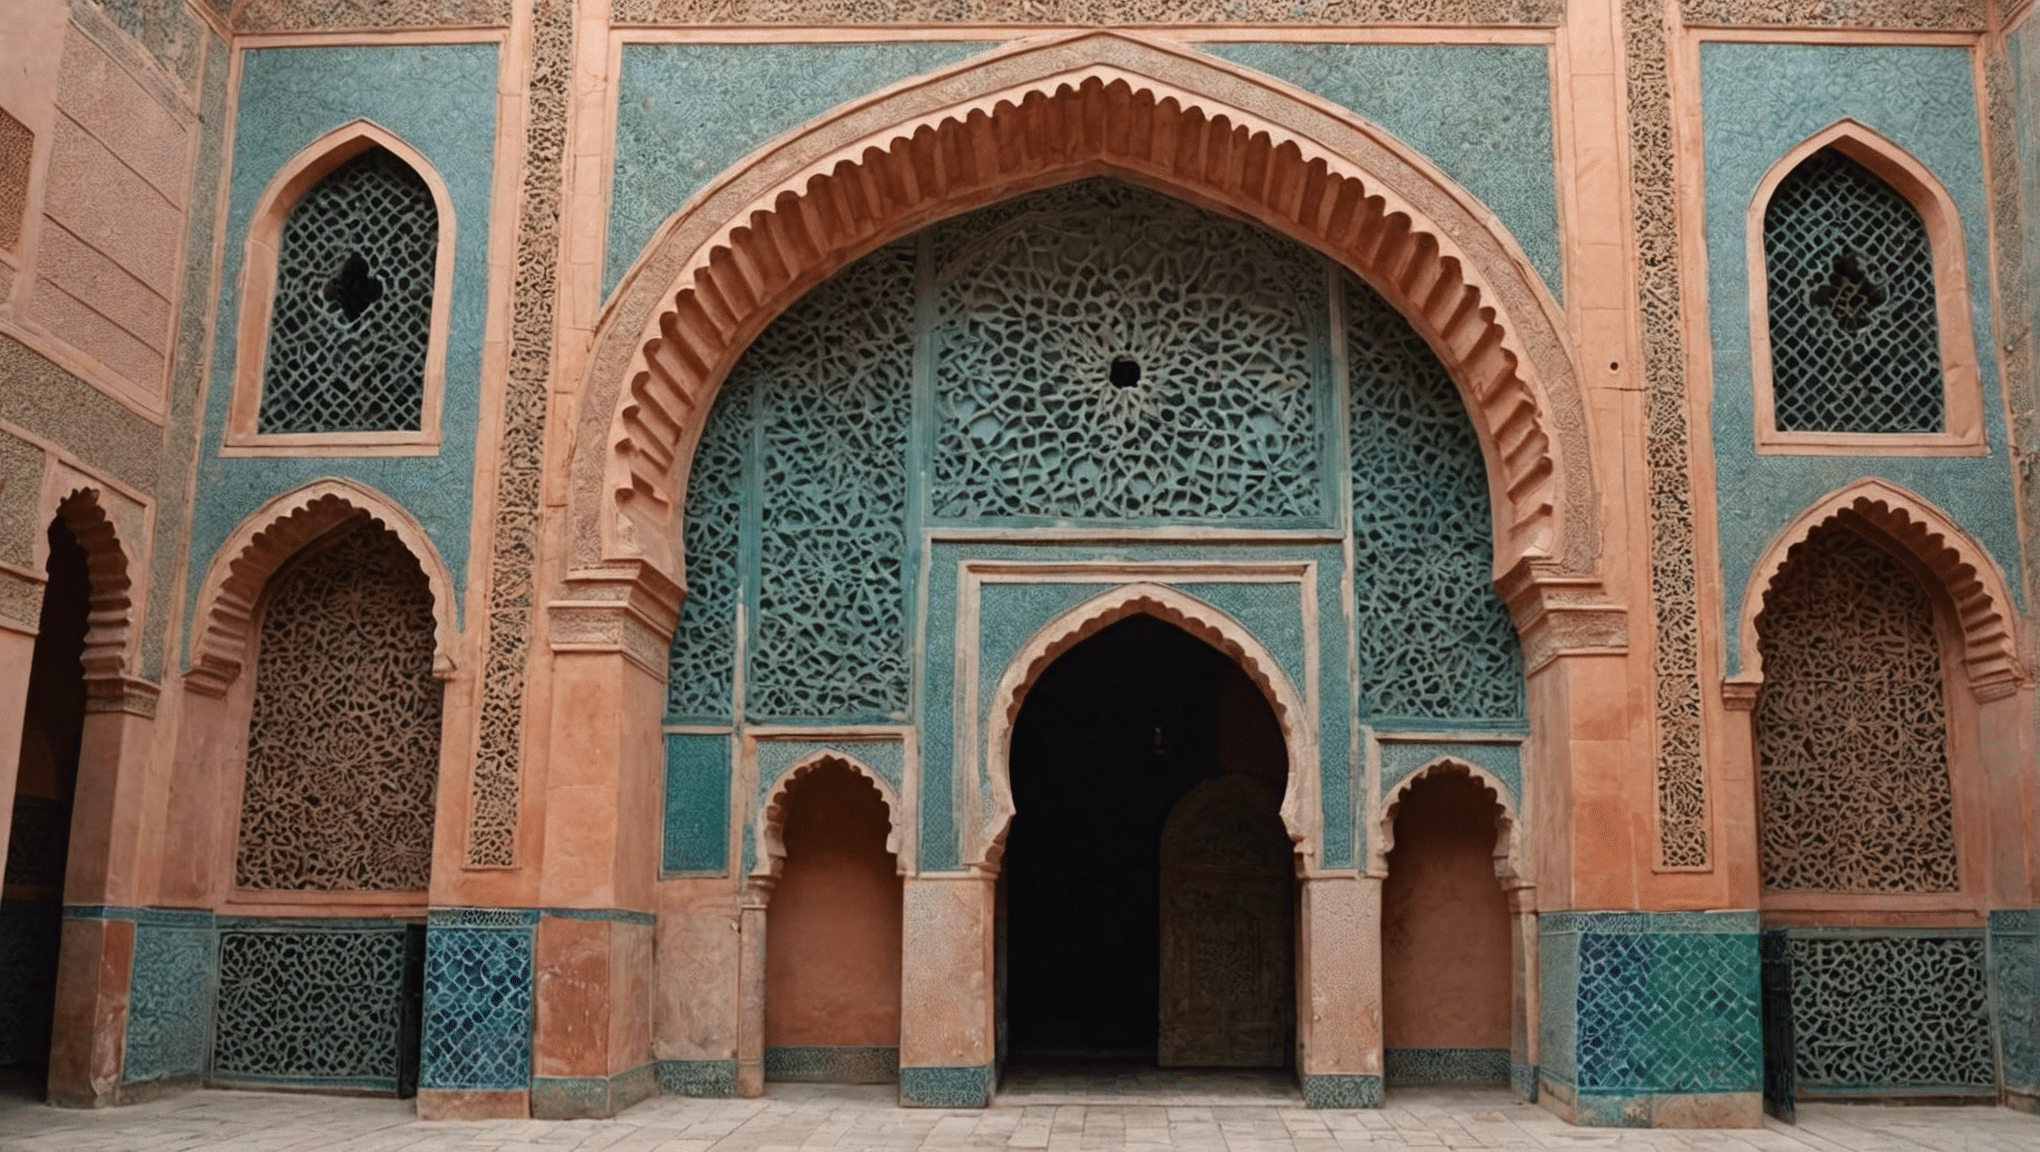 discover the entrance fee for the saadian tombs and make the most of your visit to this historical site in marrakech.